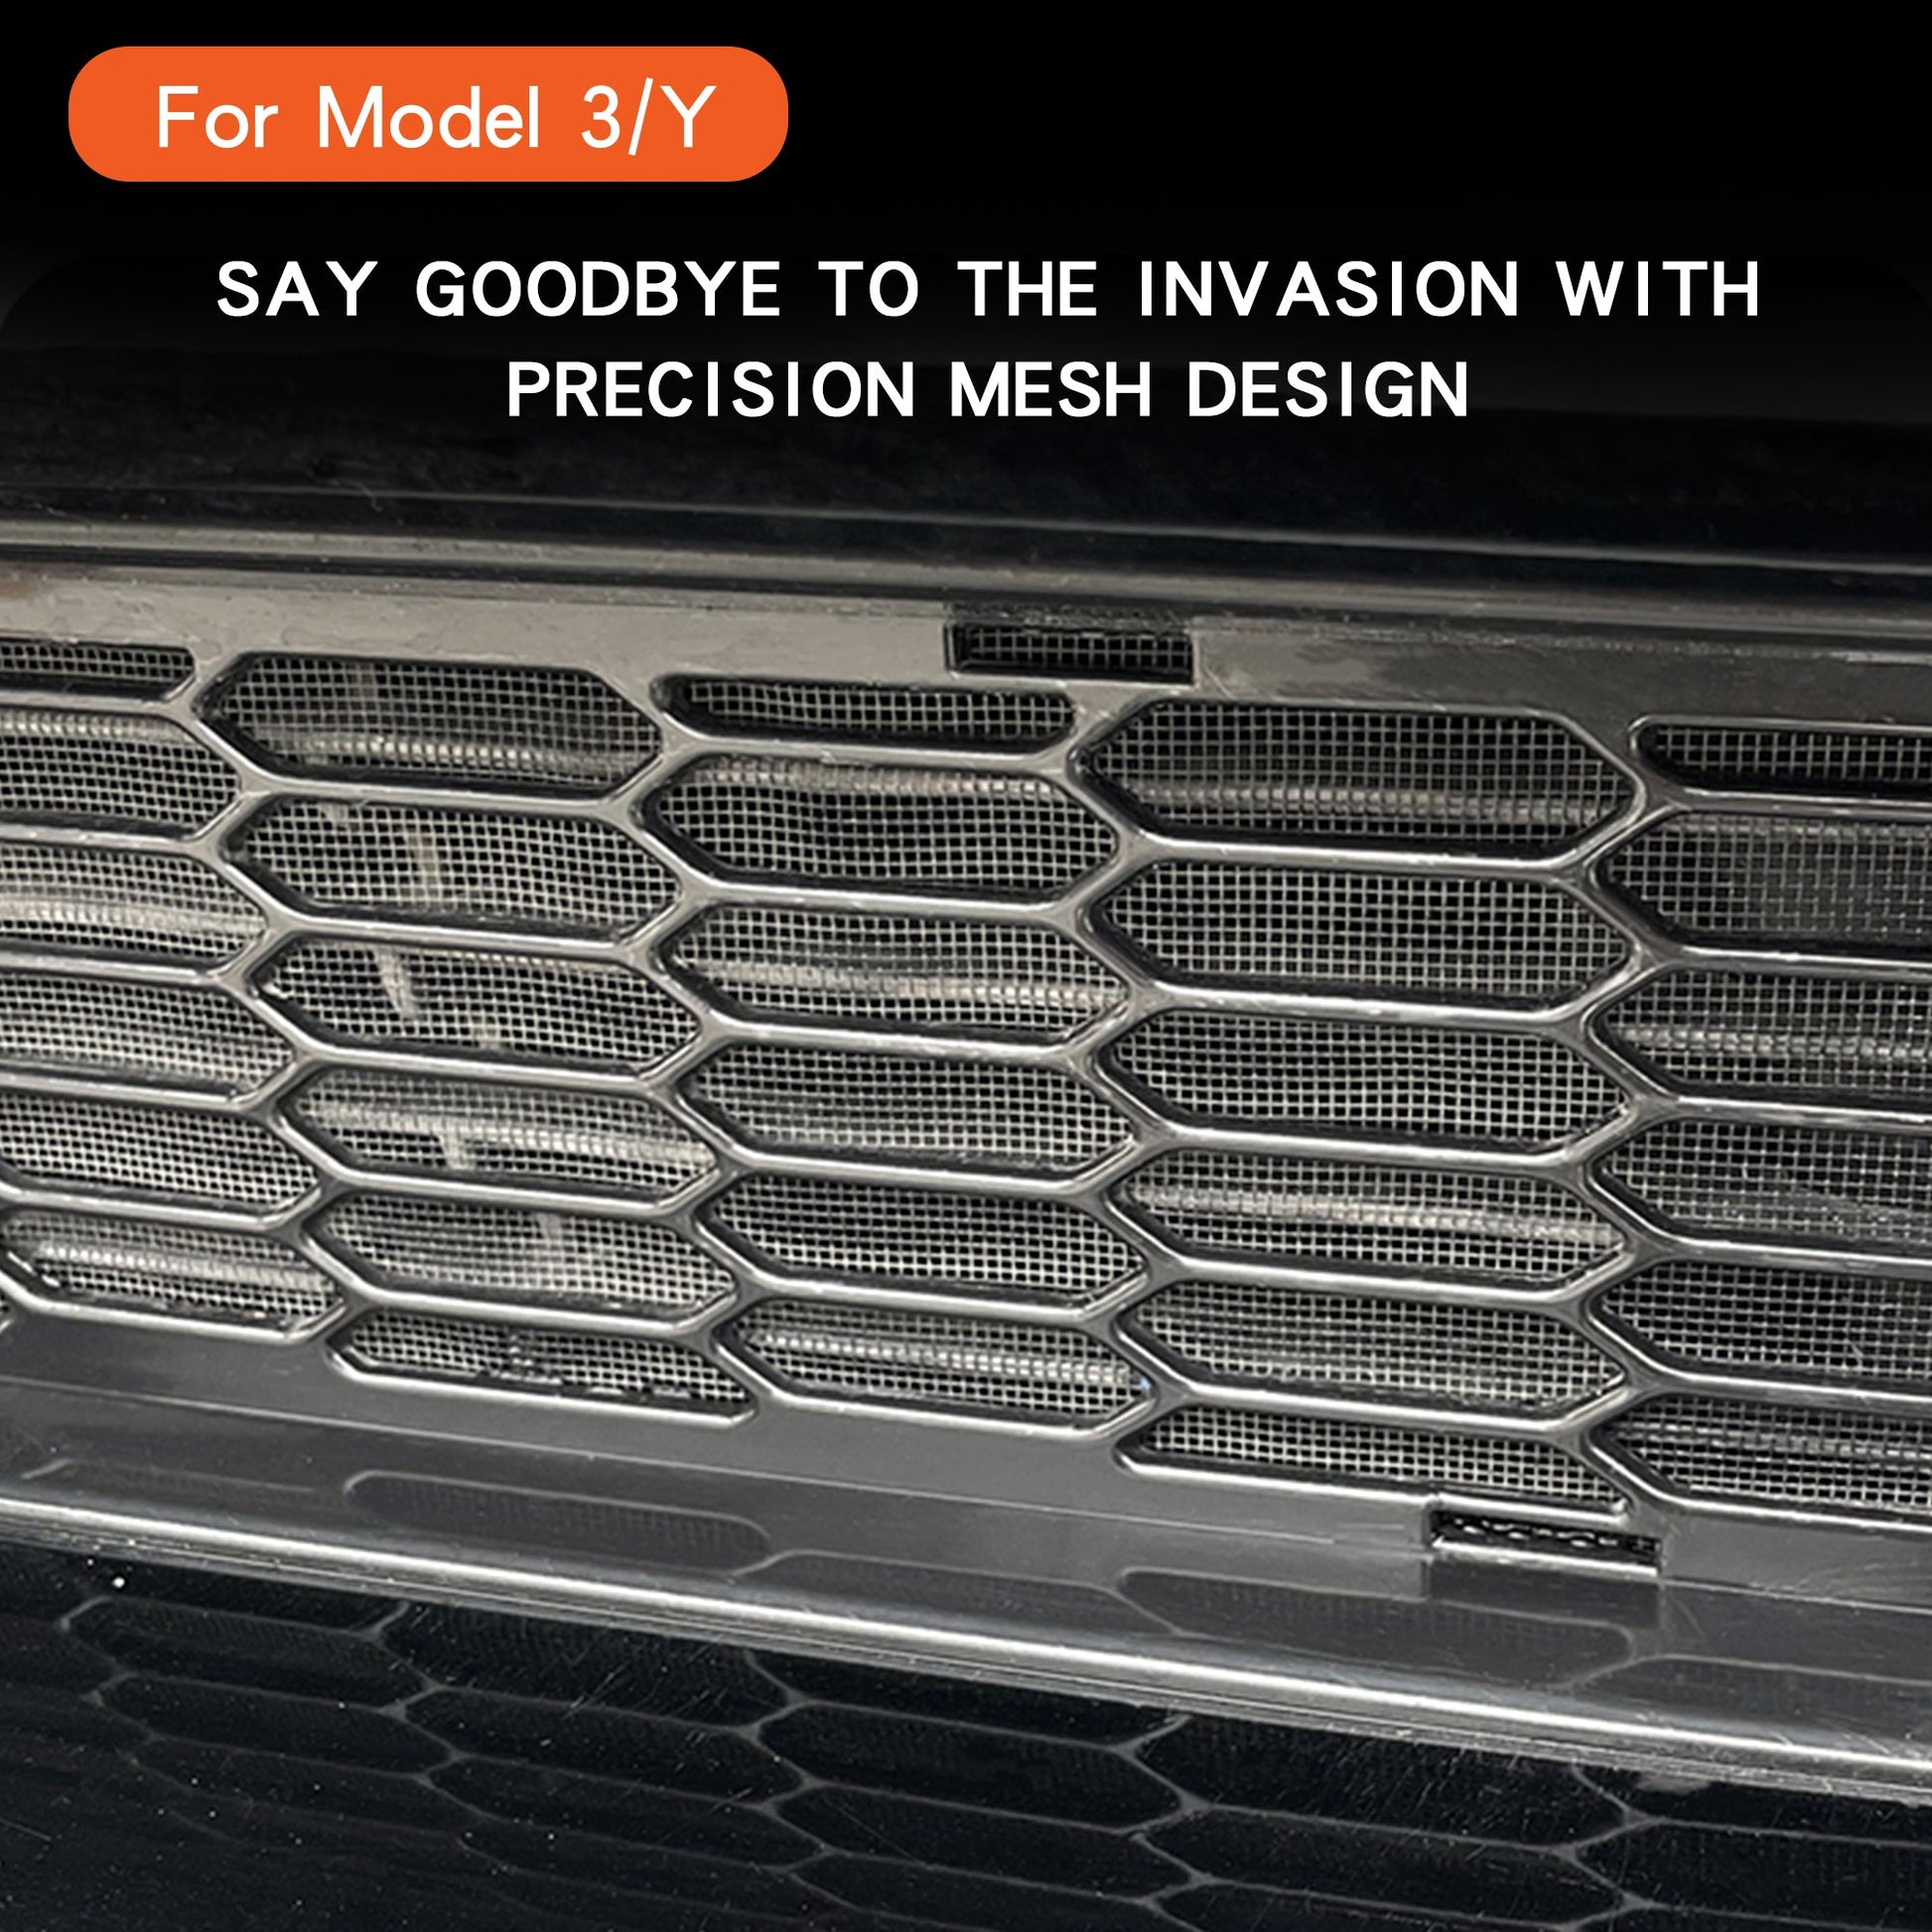 model 3 Y car 2022 2023 2021 2020 2019 2018 s3xy topabyte front grill mesh lower bumper anti inscet bugs leaves net protector autumn fall summer accessories accessory aftermarket electric car ev exterior diy decoration price must have